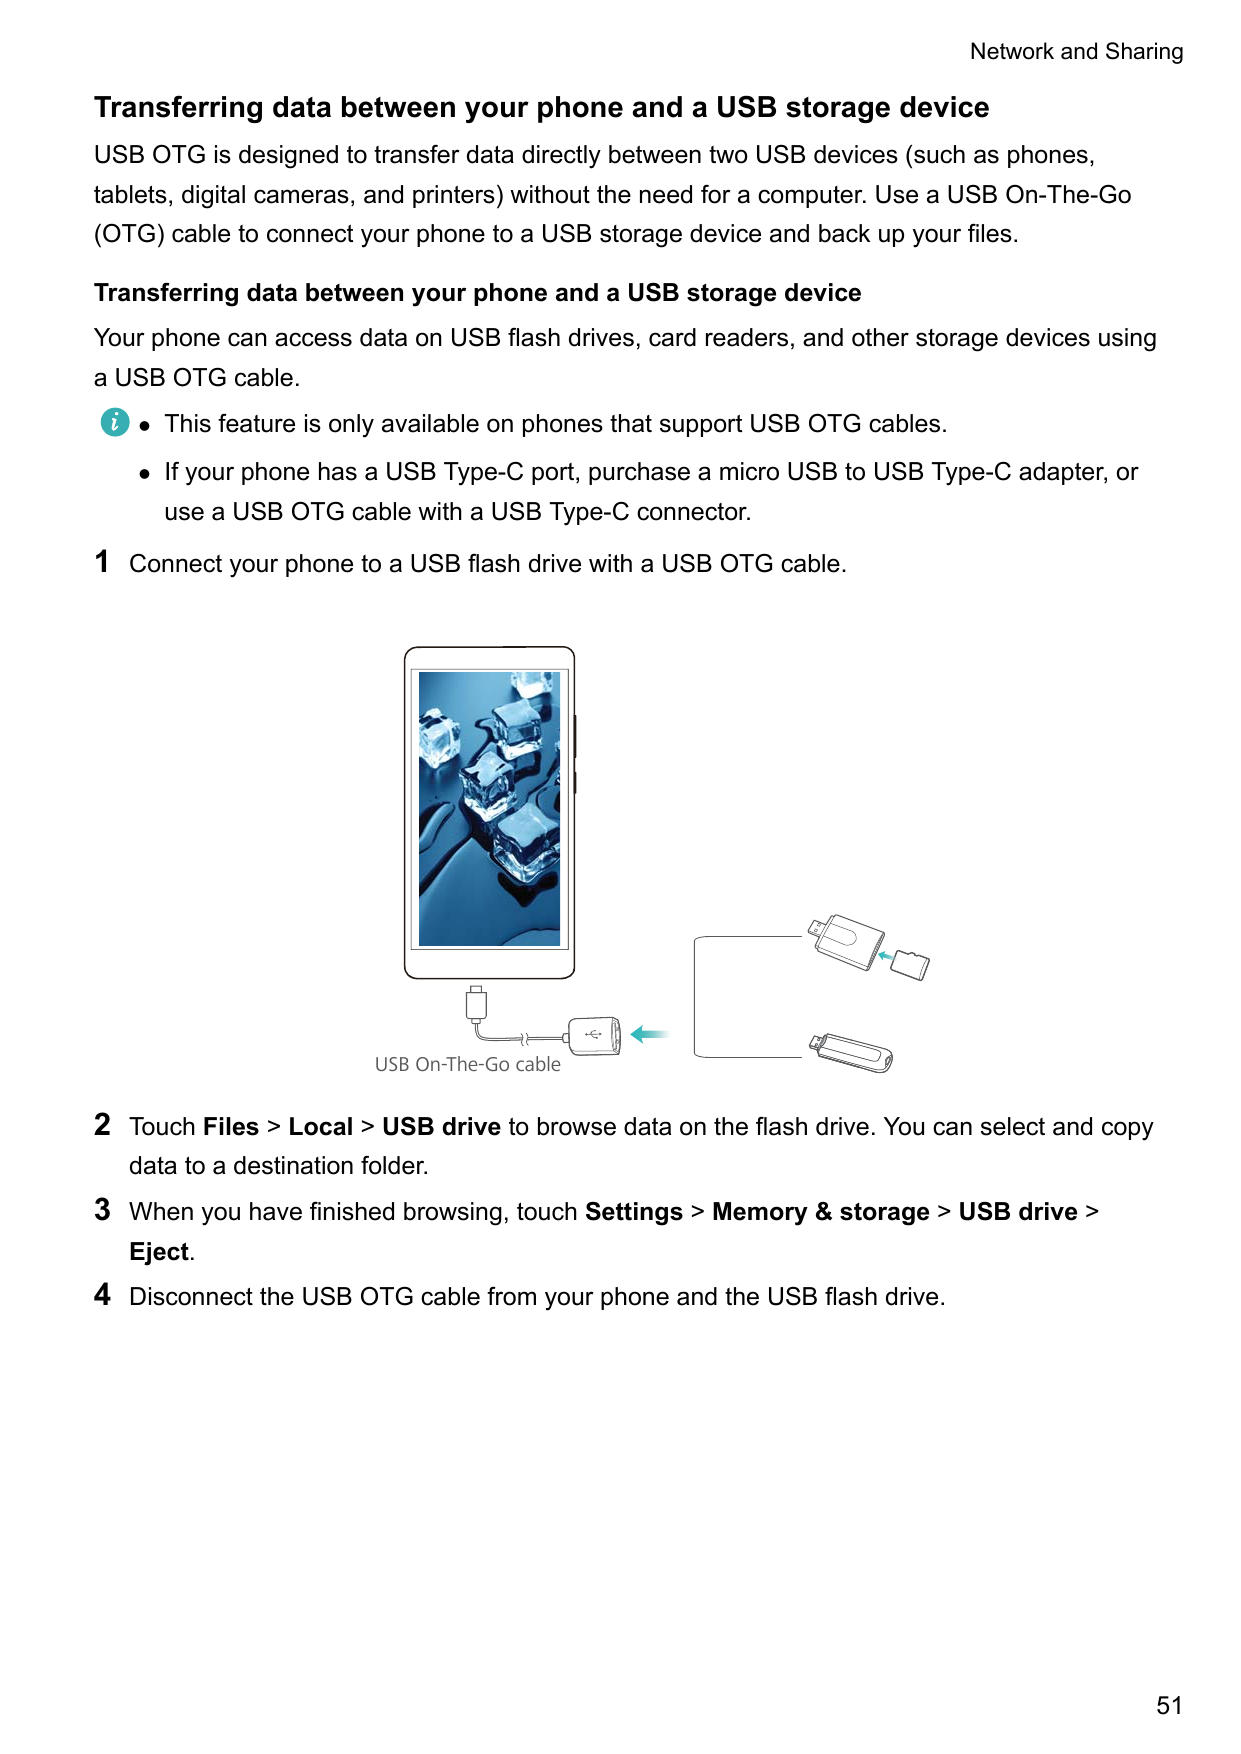 Network and SharingTransferring data between your phone and a USB storage deviceUSB OTG is designed to transfer data directly be